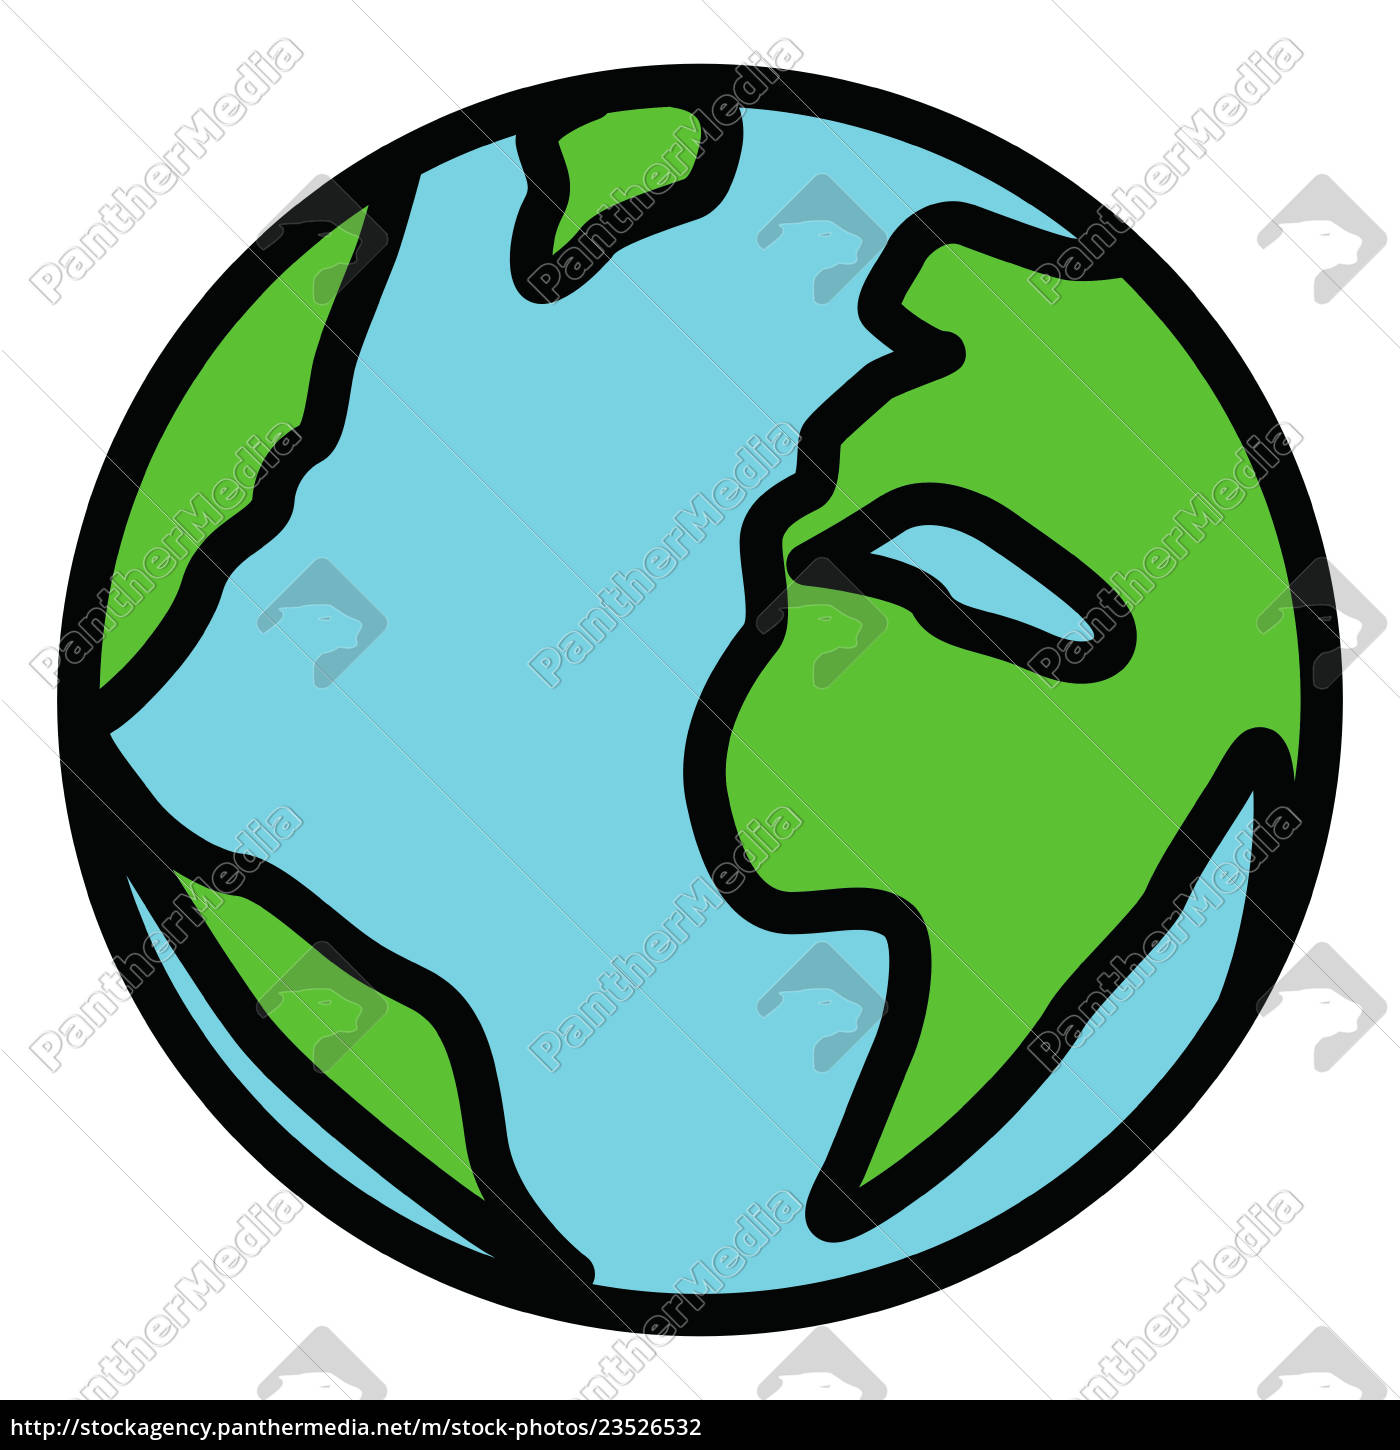 Earth Drawing Icon On White Background Royalty Free Photo 23526532 Panthermedia Stock Agency